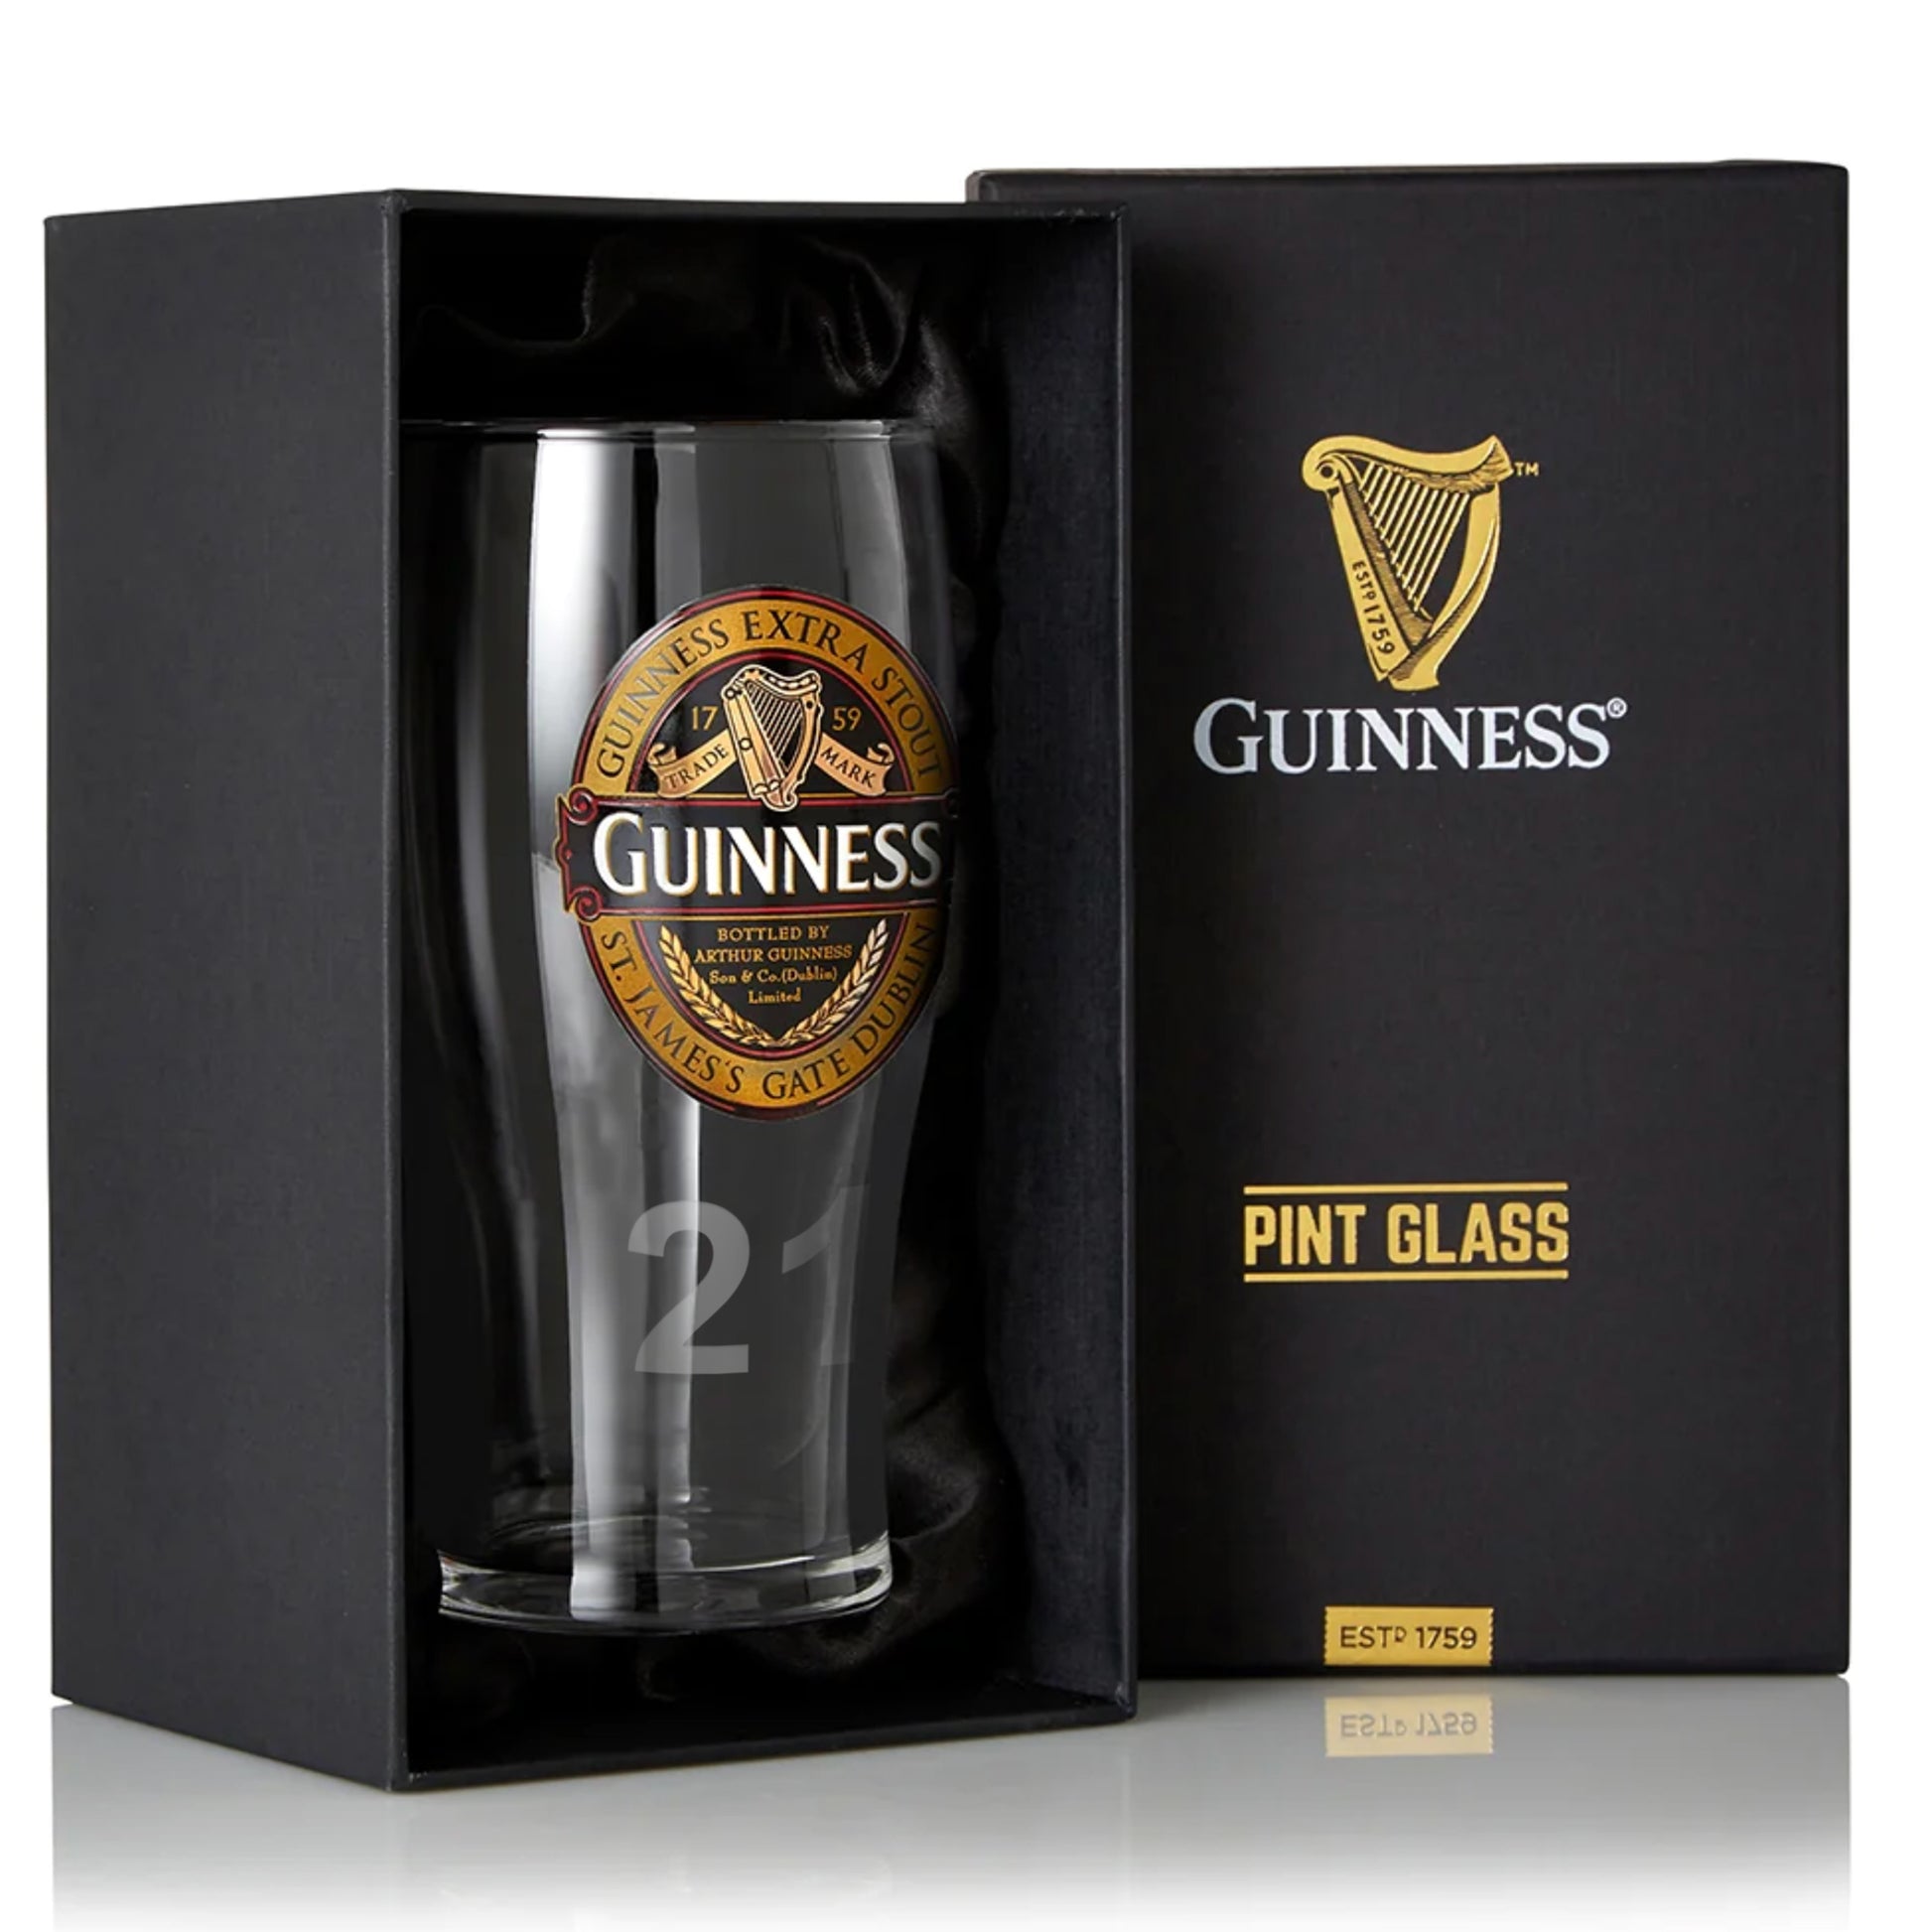 A Guinness Classic Pint Glass securely packaged in a box.